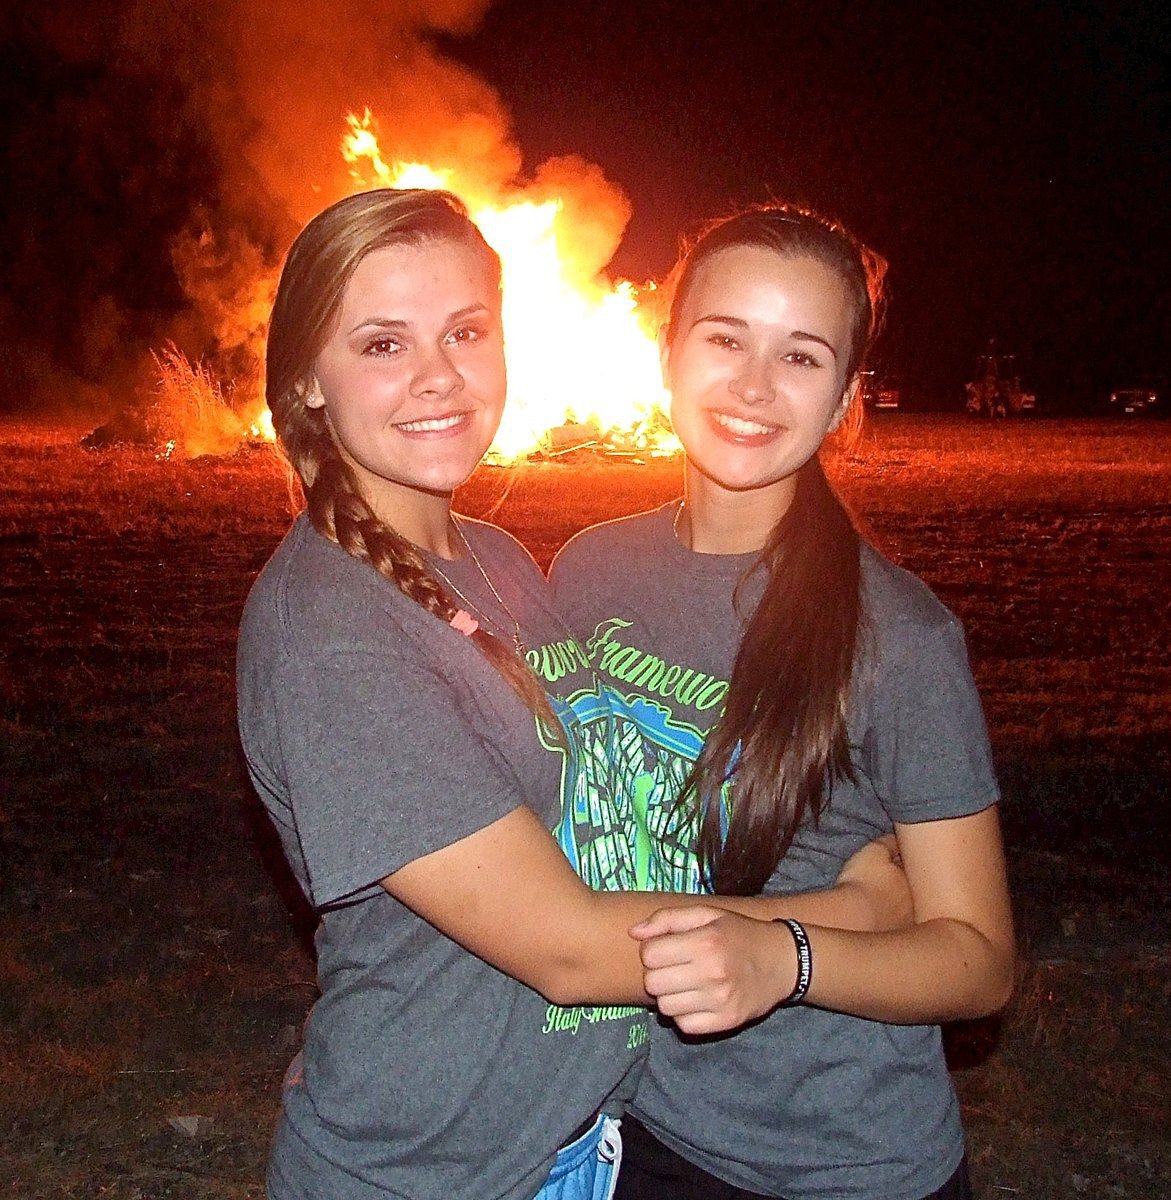 Image: Band members Lillie Perry and Amber Hooker pose in front of the bonfire.